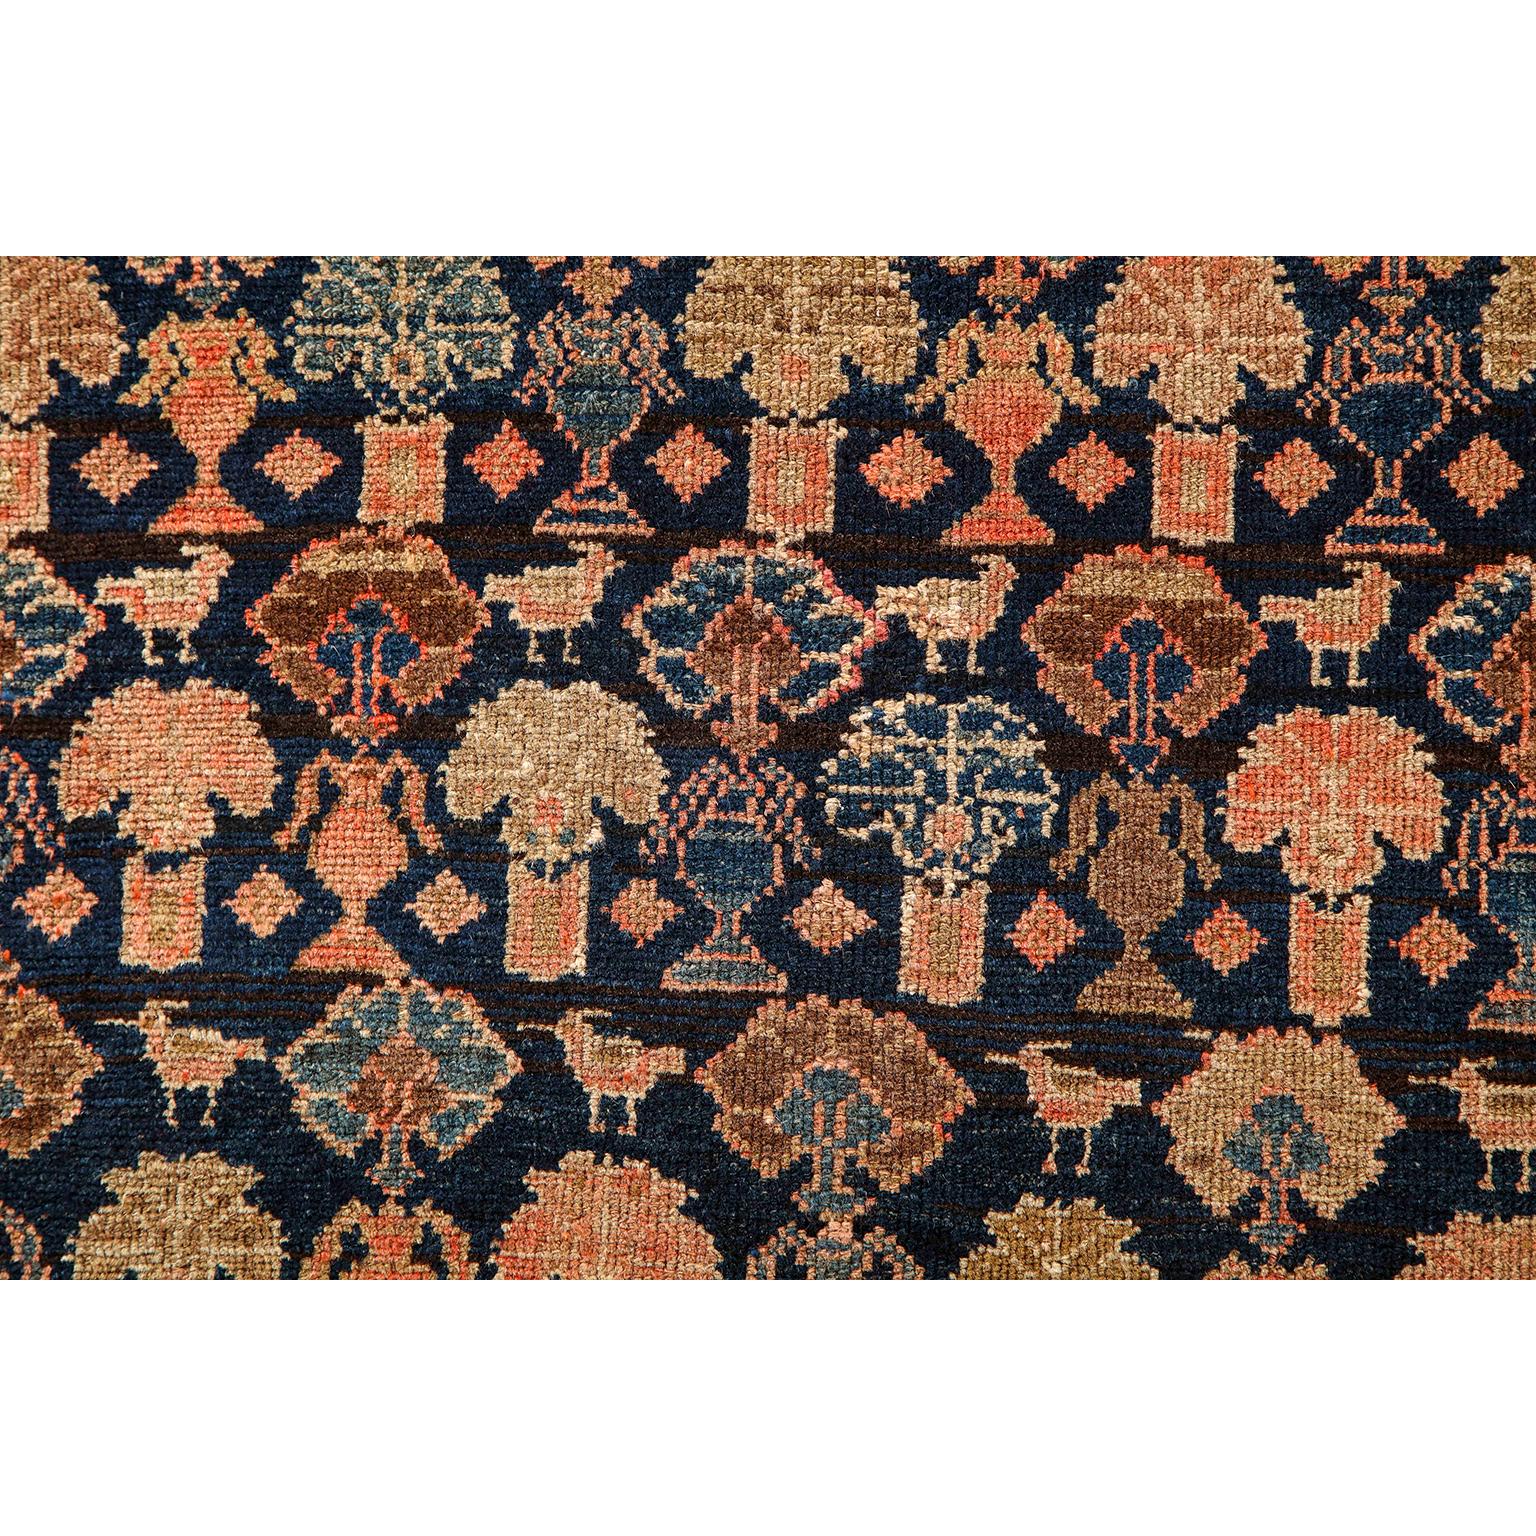 Early 20th Century Antique 1900s Persian Malayer Rug, Flower Motifs, 5' x 7' For Sale